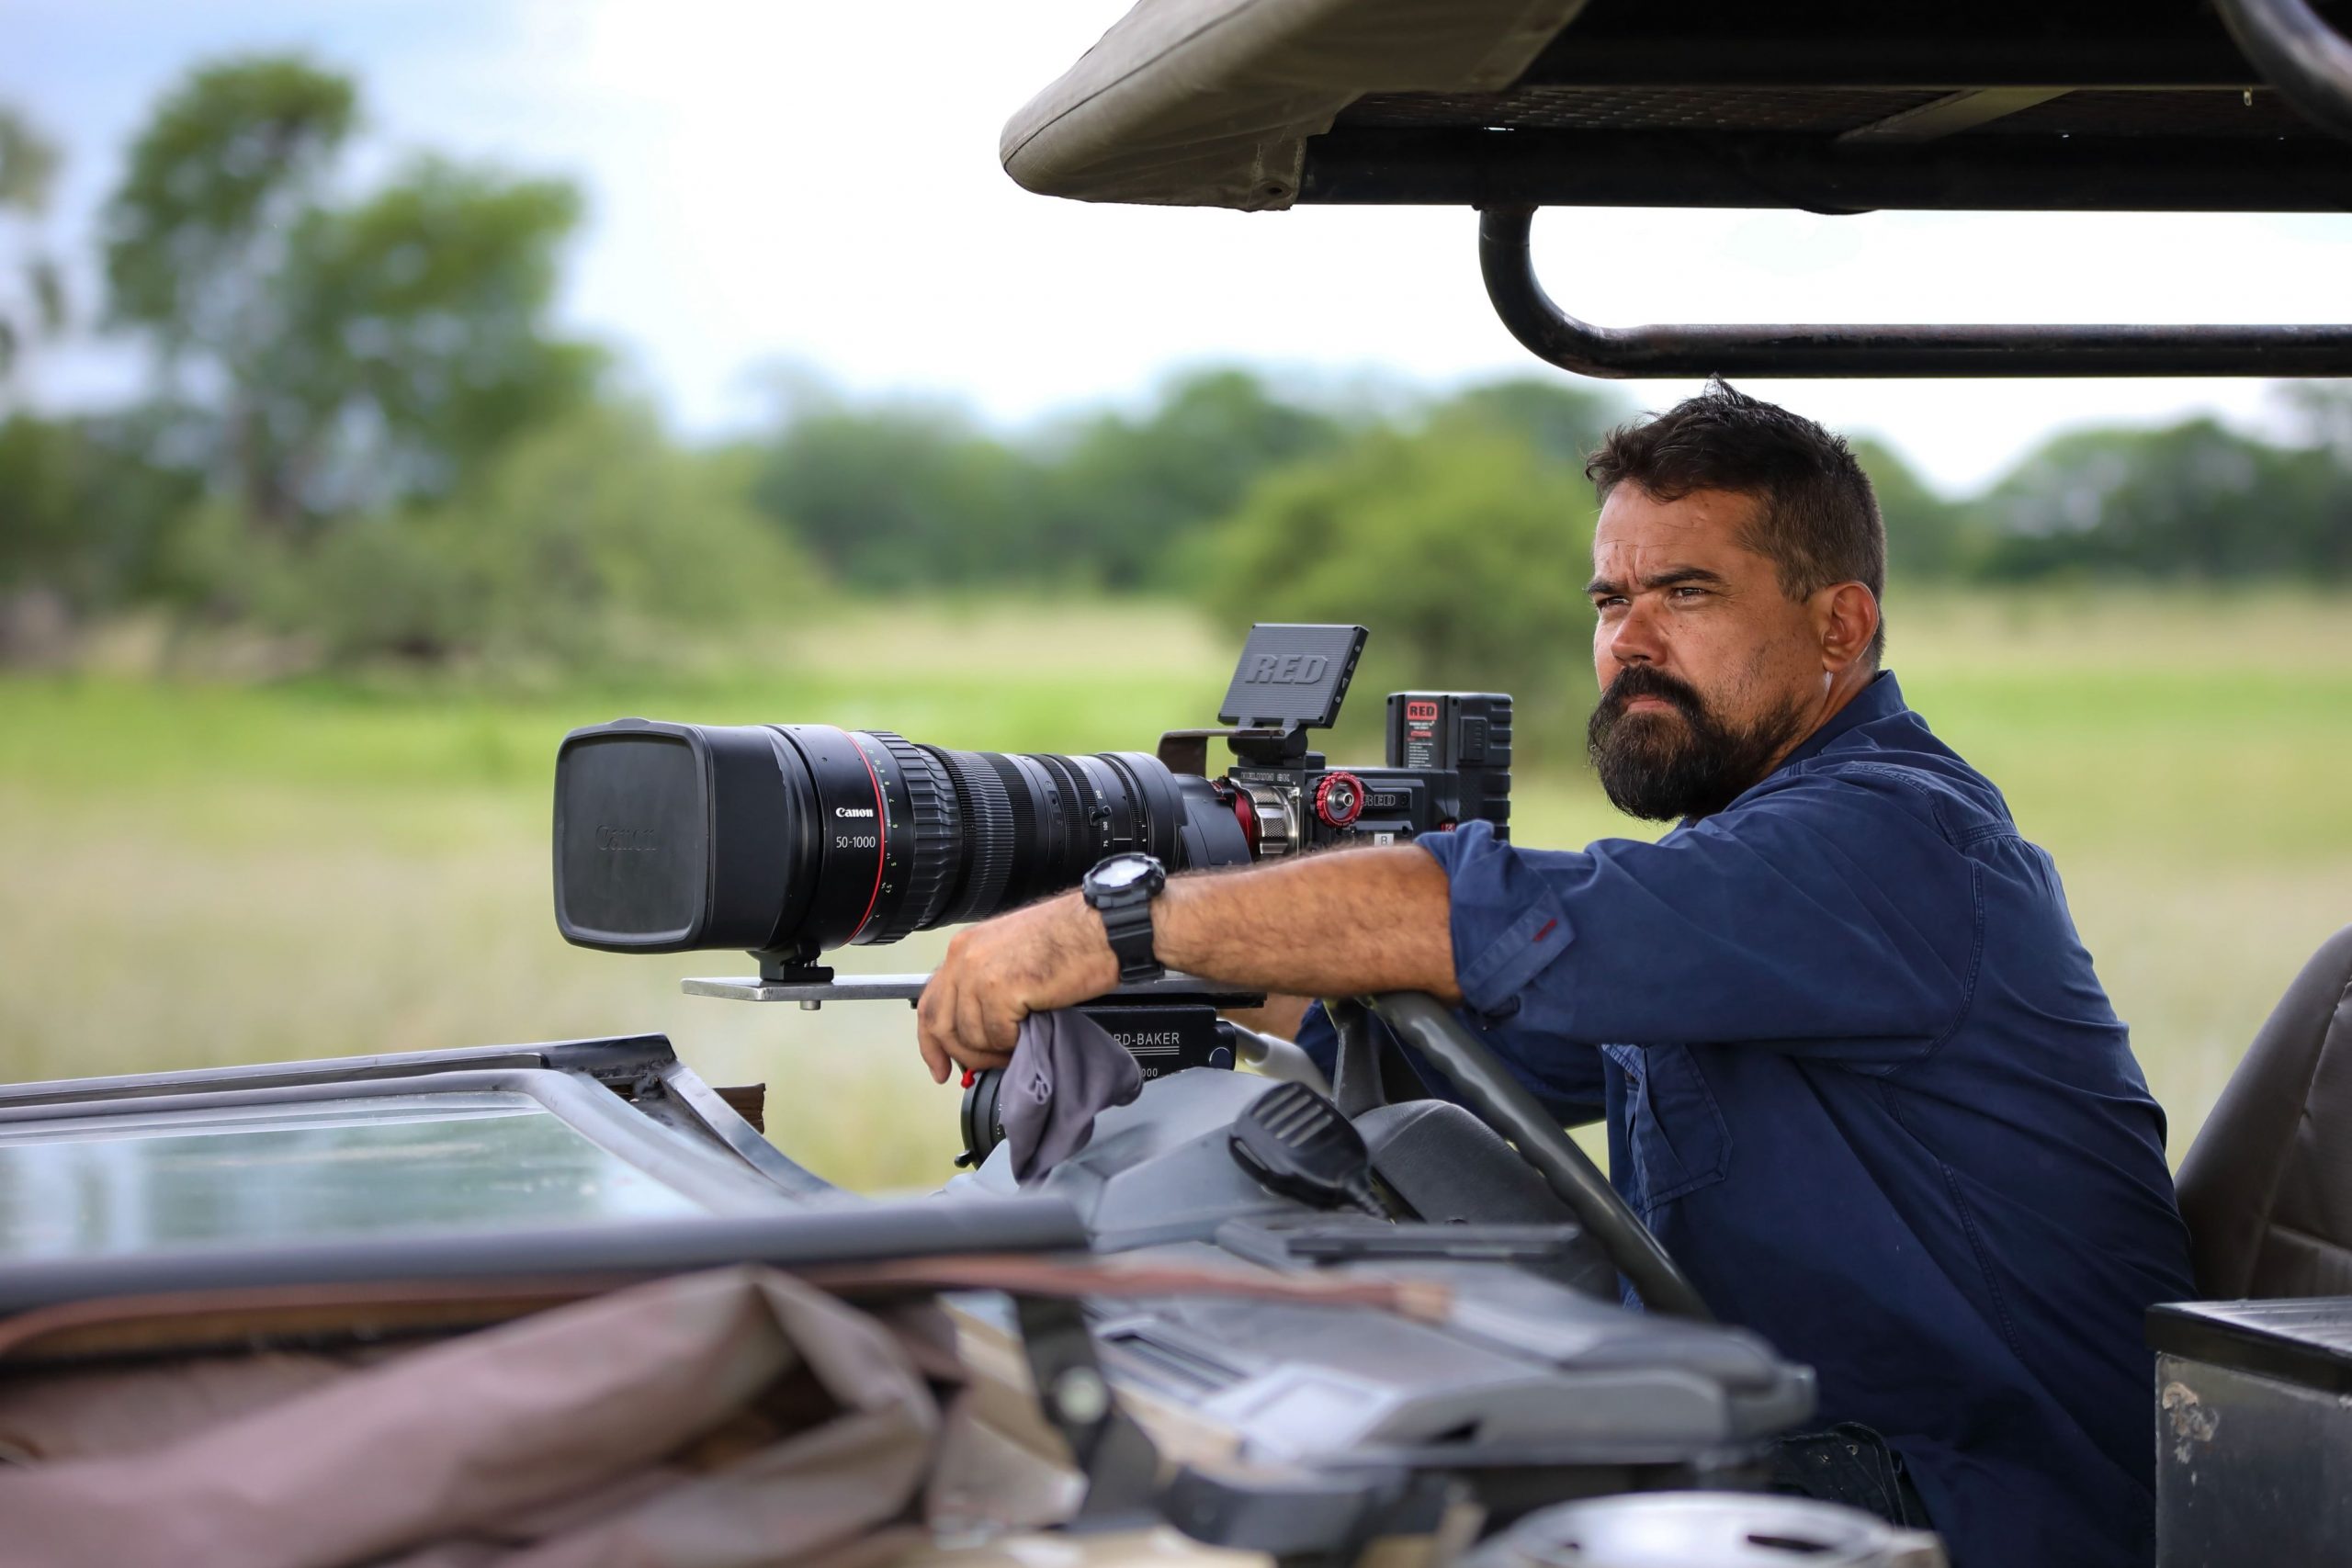 Nick Walton speaks to acclaimed Botswanan wildlife filmmaker Brad Bestelink about his childhood in the bush, the influence natural history films can have on new audiences, and how poaching can be curbed through effective eco-tourism.